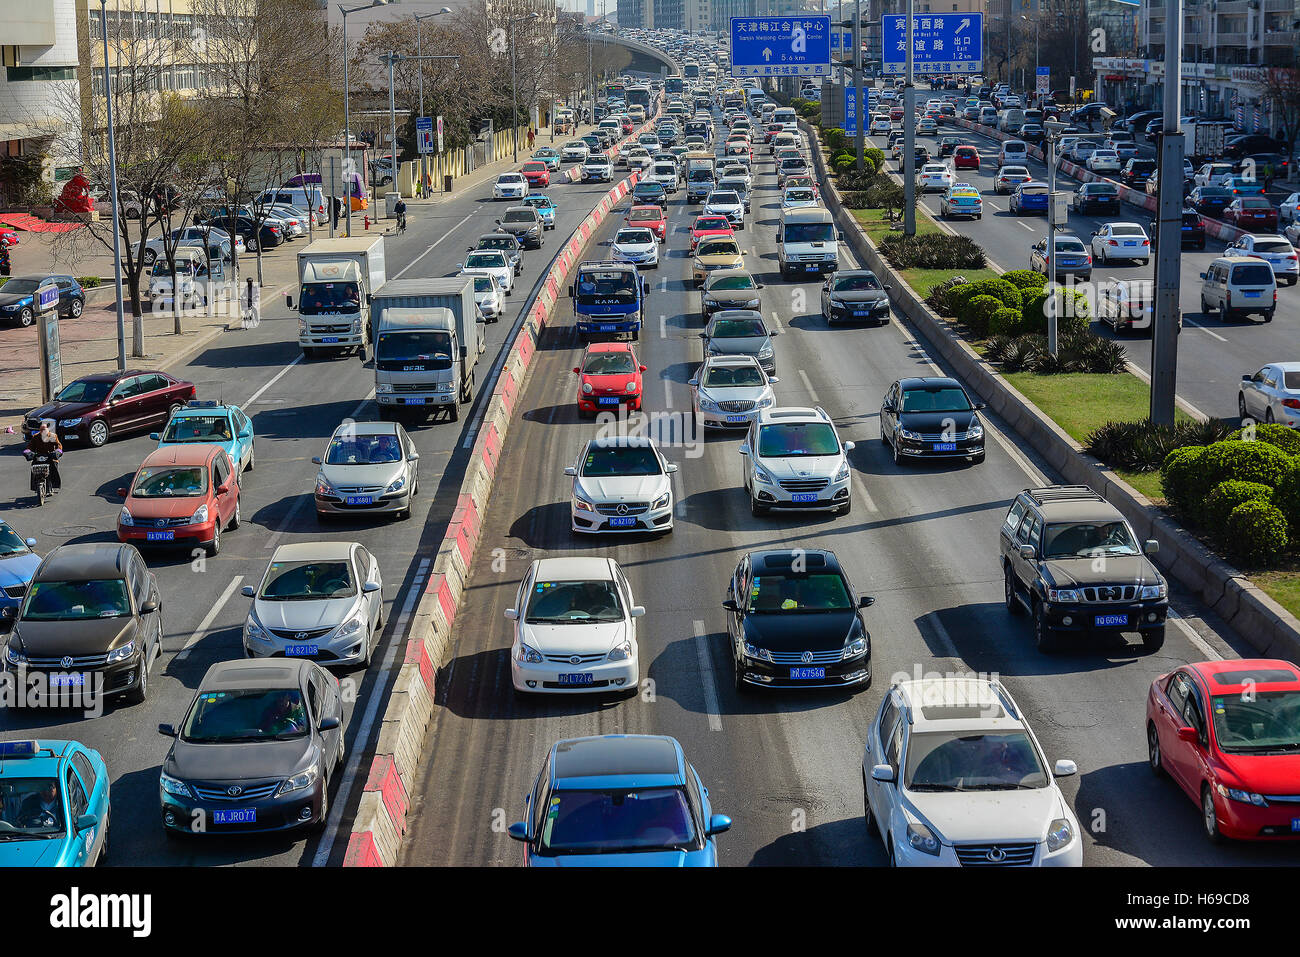 Tianjin,China - March 26,2016 : City traffic, traffic jams, a stream of cars in rush hour in Tianjin city China. Stock Photo